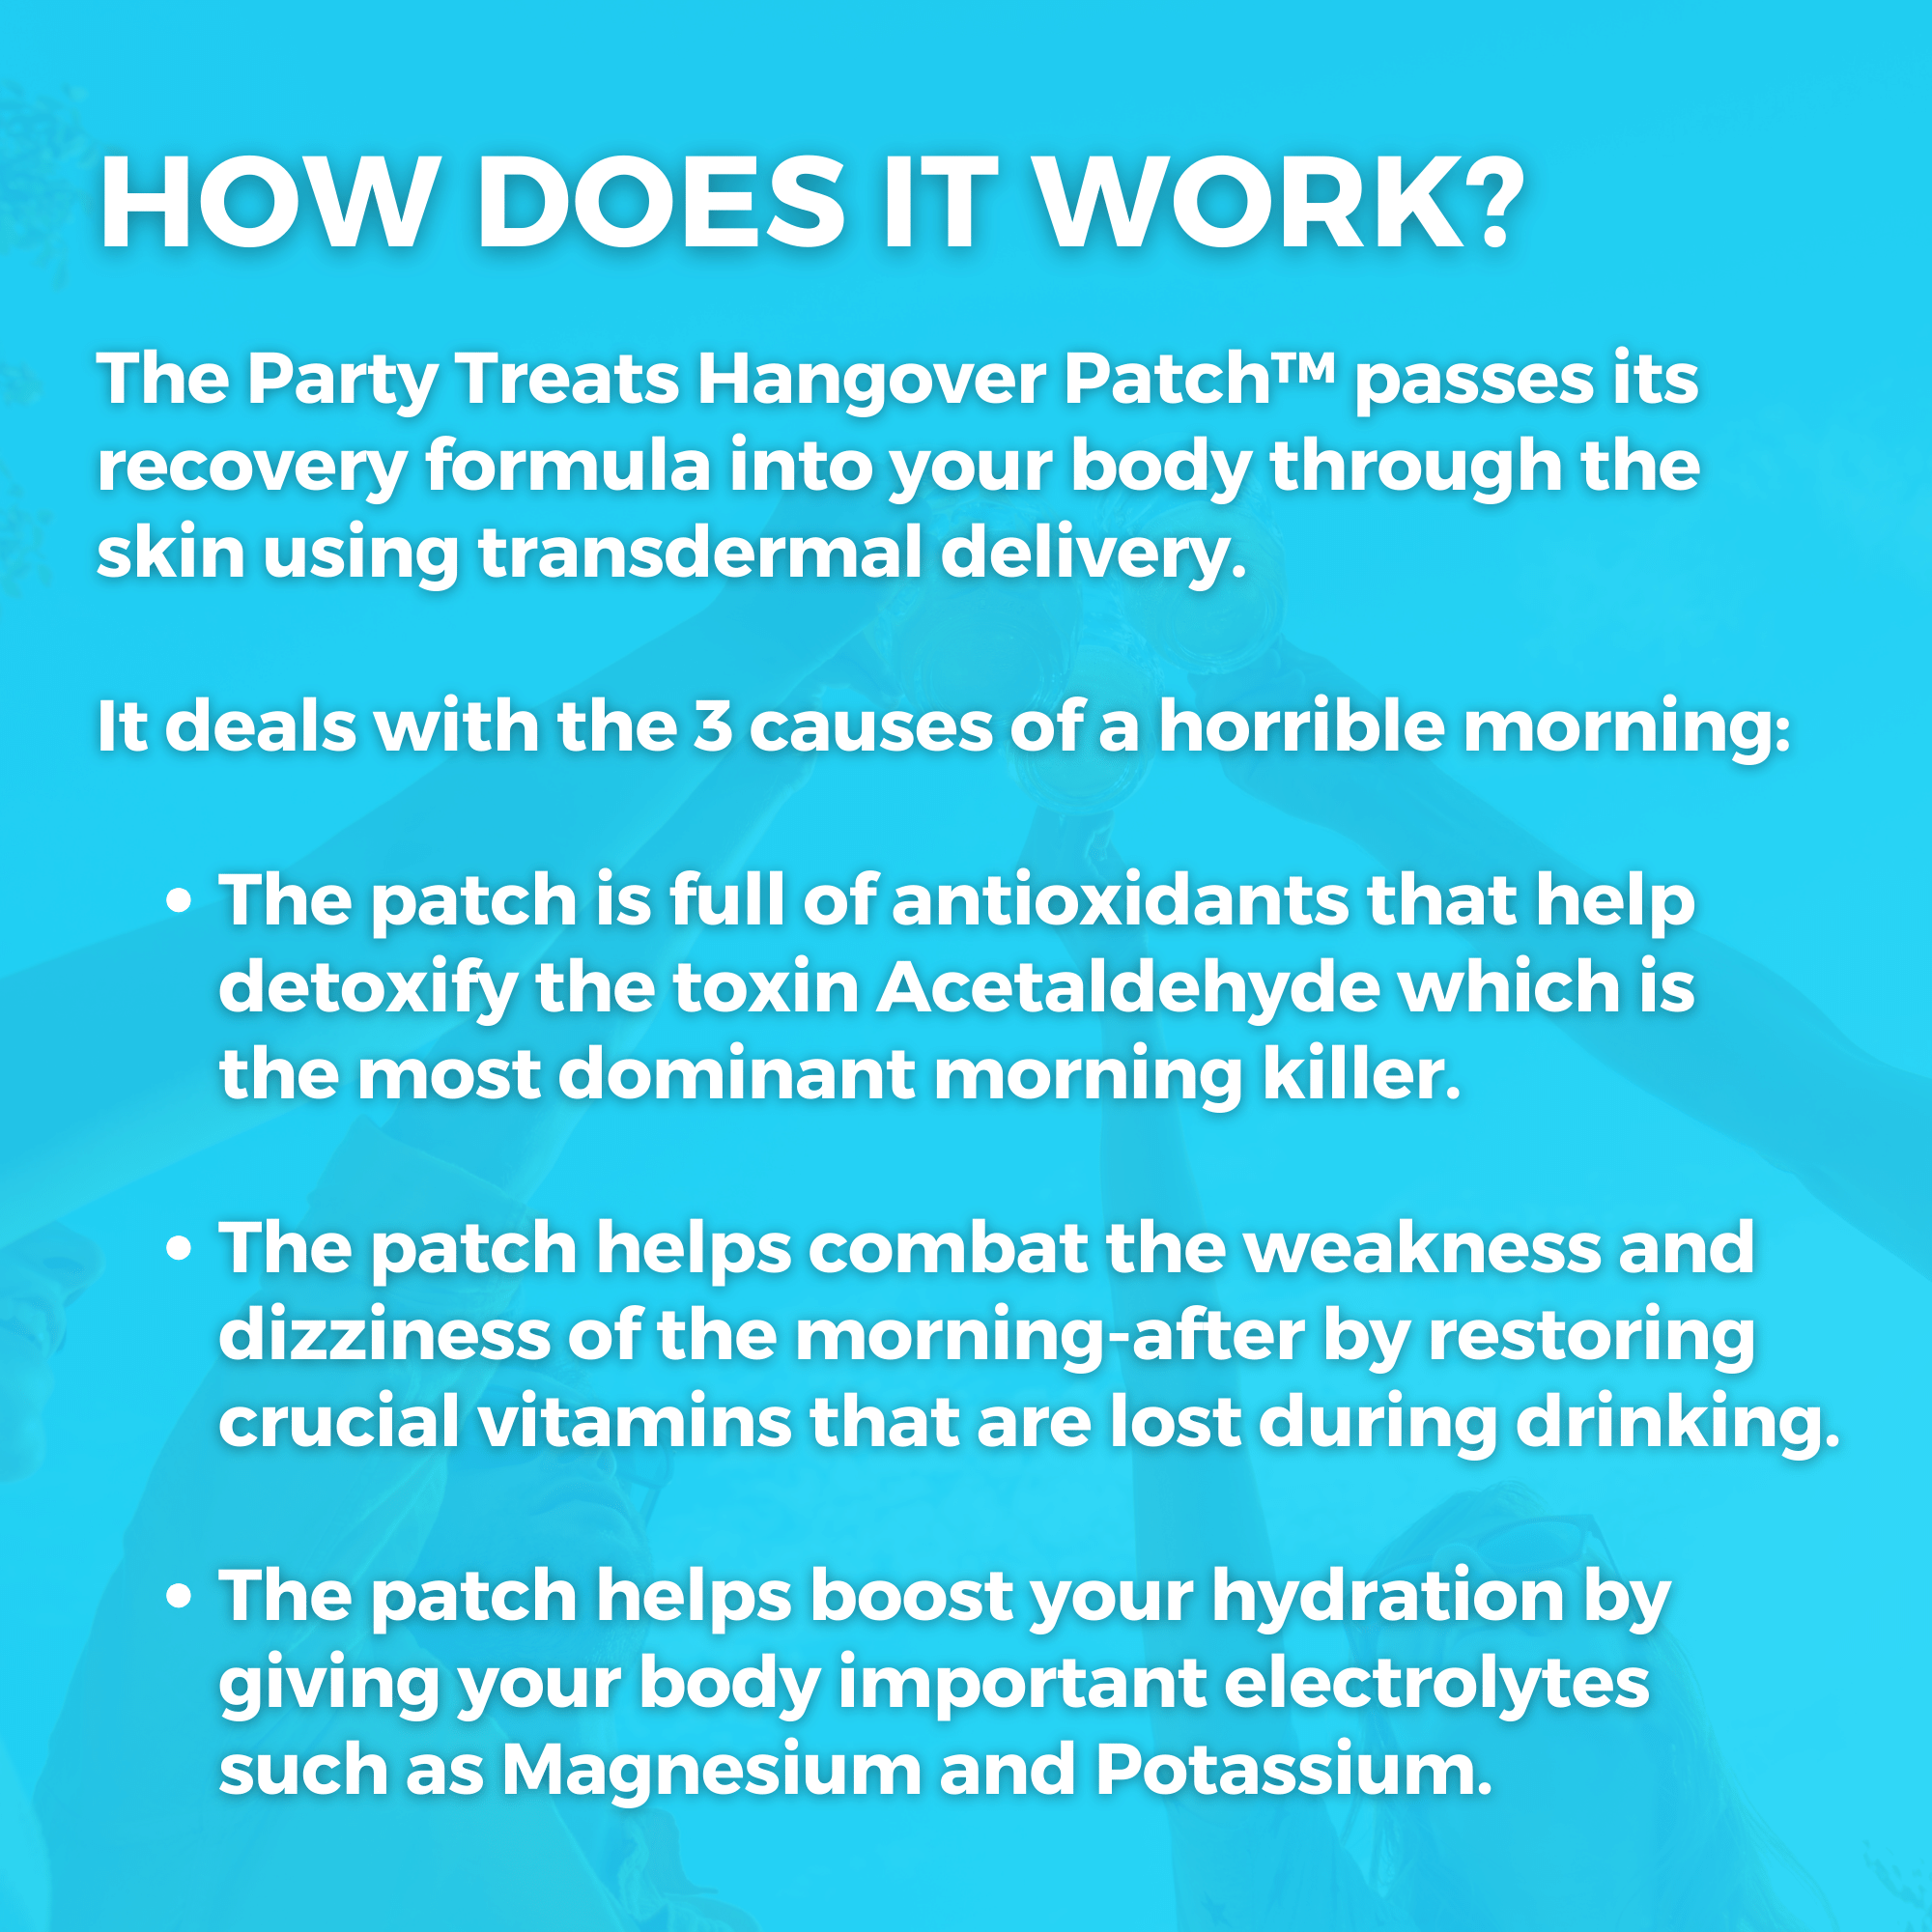 Party Patch, #1 Hangover Patch ✚𝐍𝐀𝐓𝐔𝐑𝐀𝐋 𝐇𝐀𝐍𝐆𝐎𝐕𝐄𝐑  𝐃𝐄𝐅𝐄𝐍𝐒𝐄✚ Apply while drinking ➜ Remove next day 🥂🚫🤢💯  #wintomorrow  By Party Patch